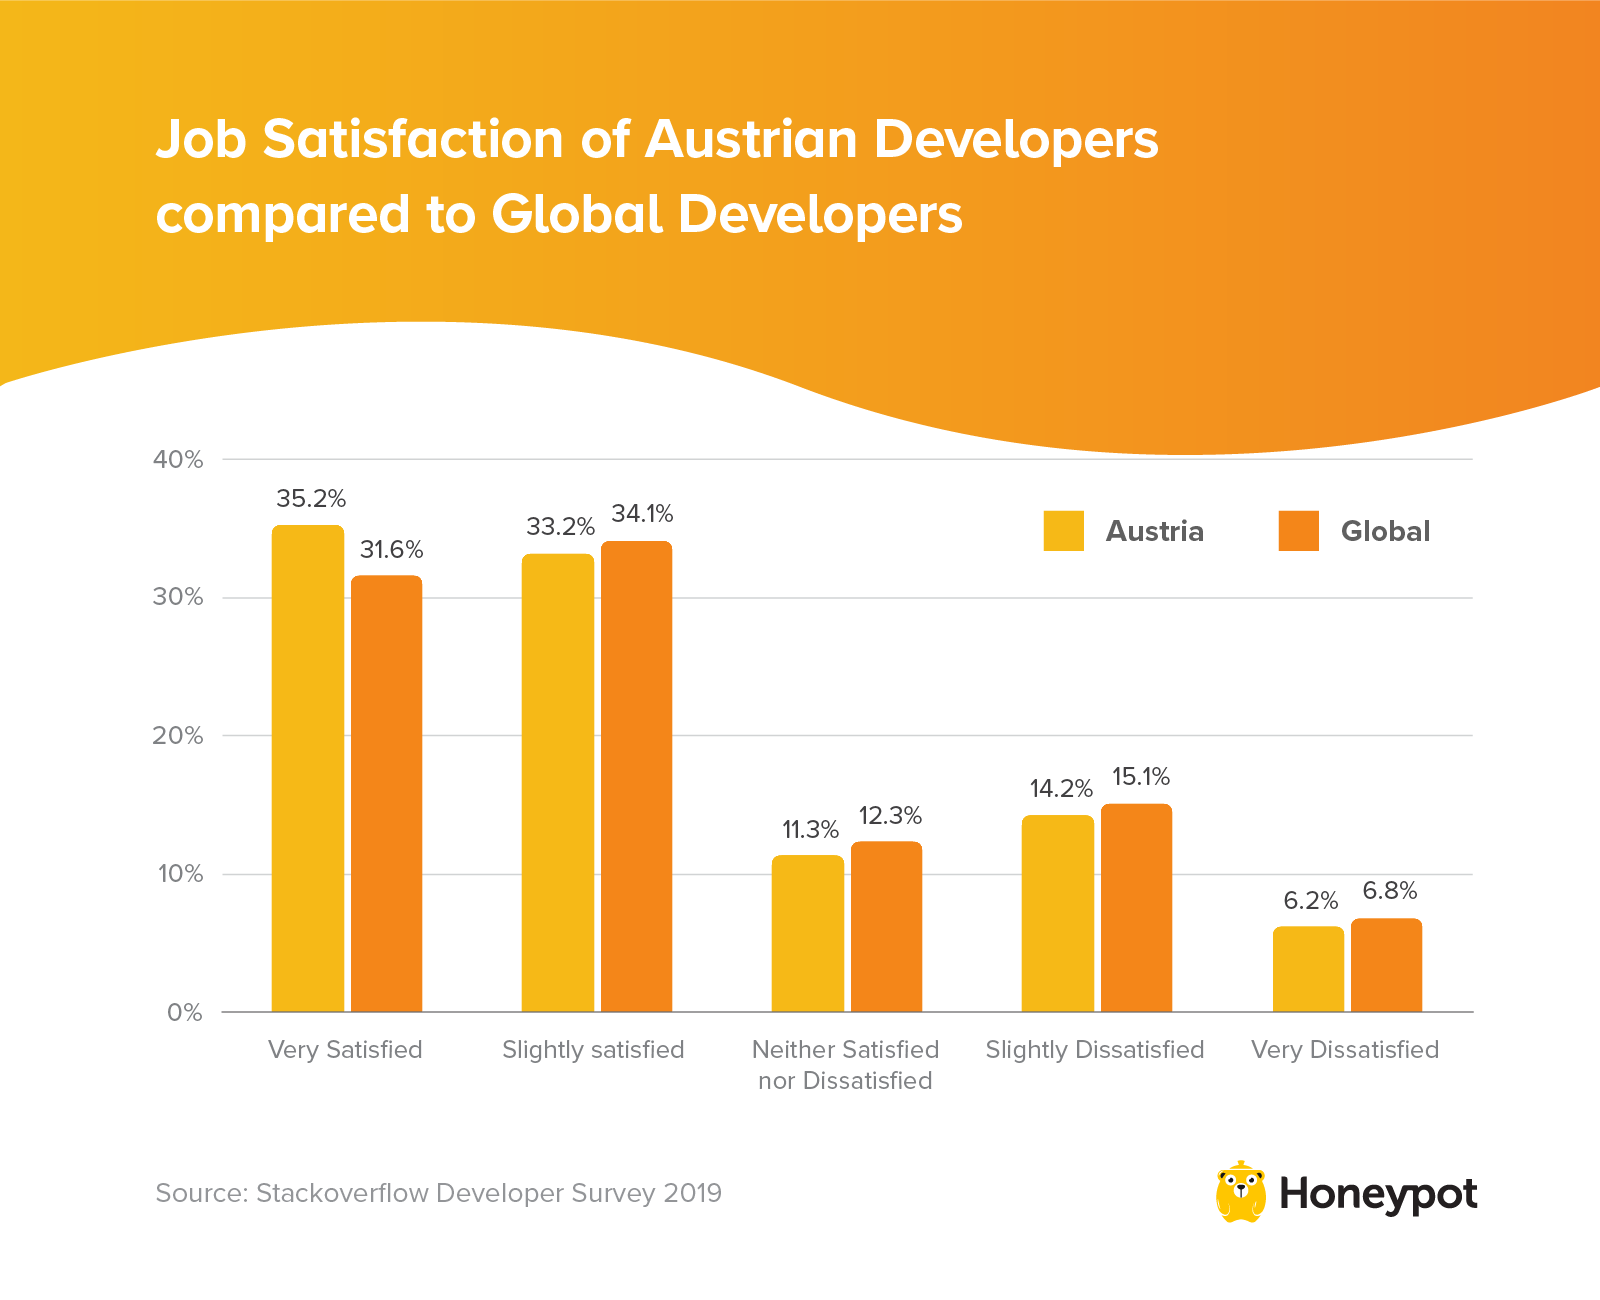 Job satisfaction of Austrian developers compared to global developers